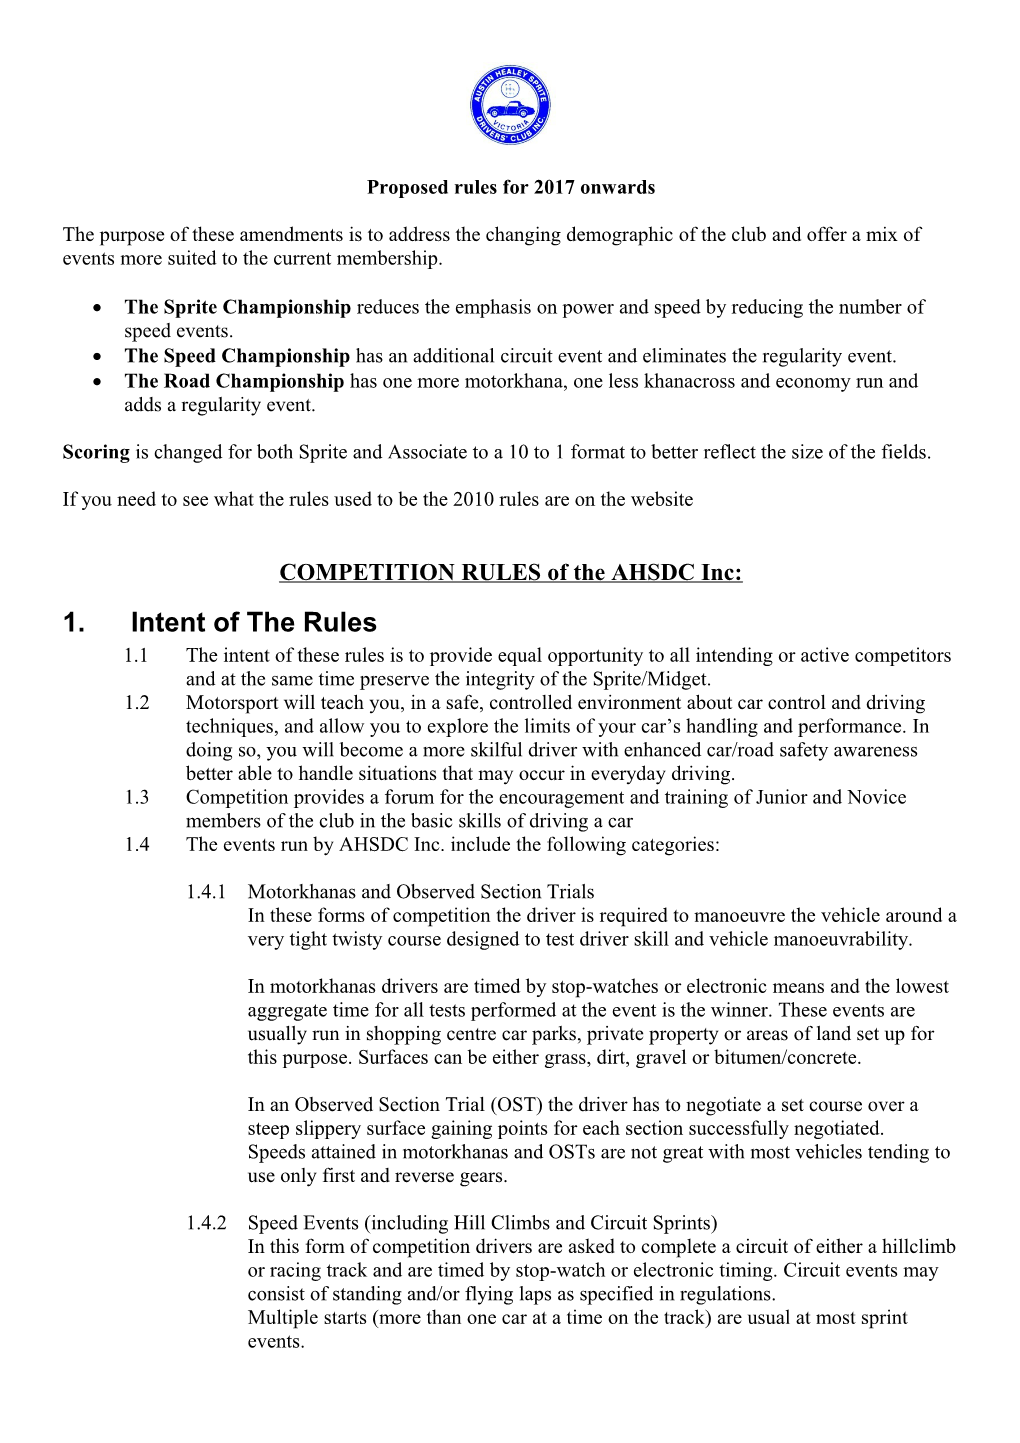 COMPETITION RULES of the AHSDC